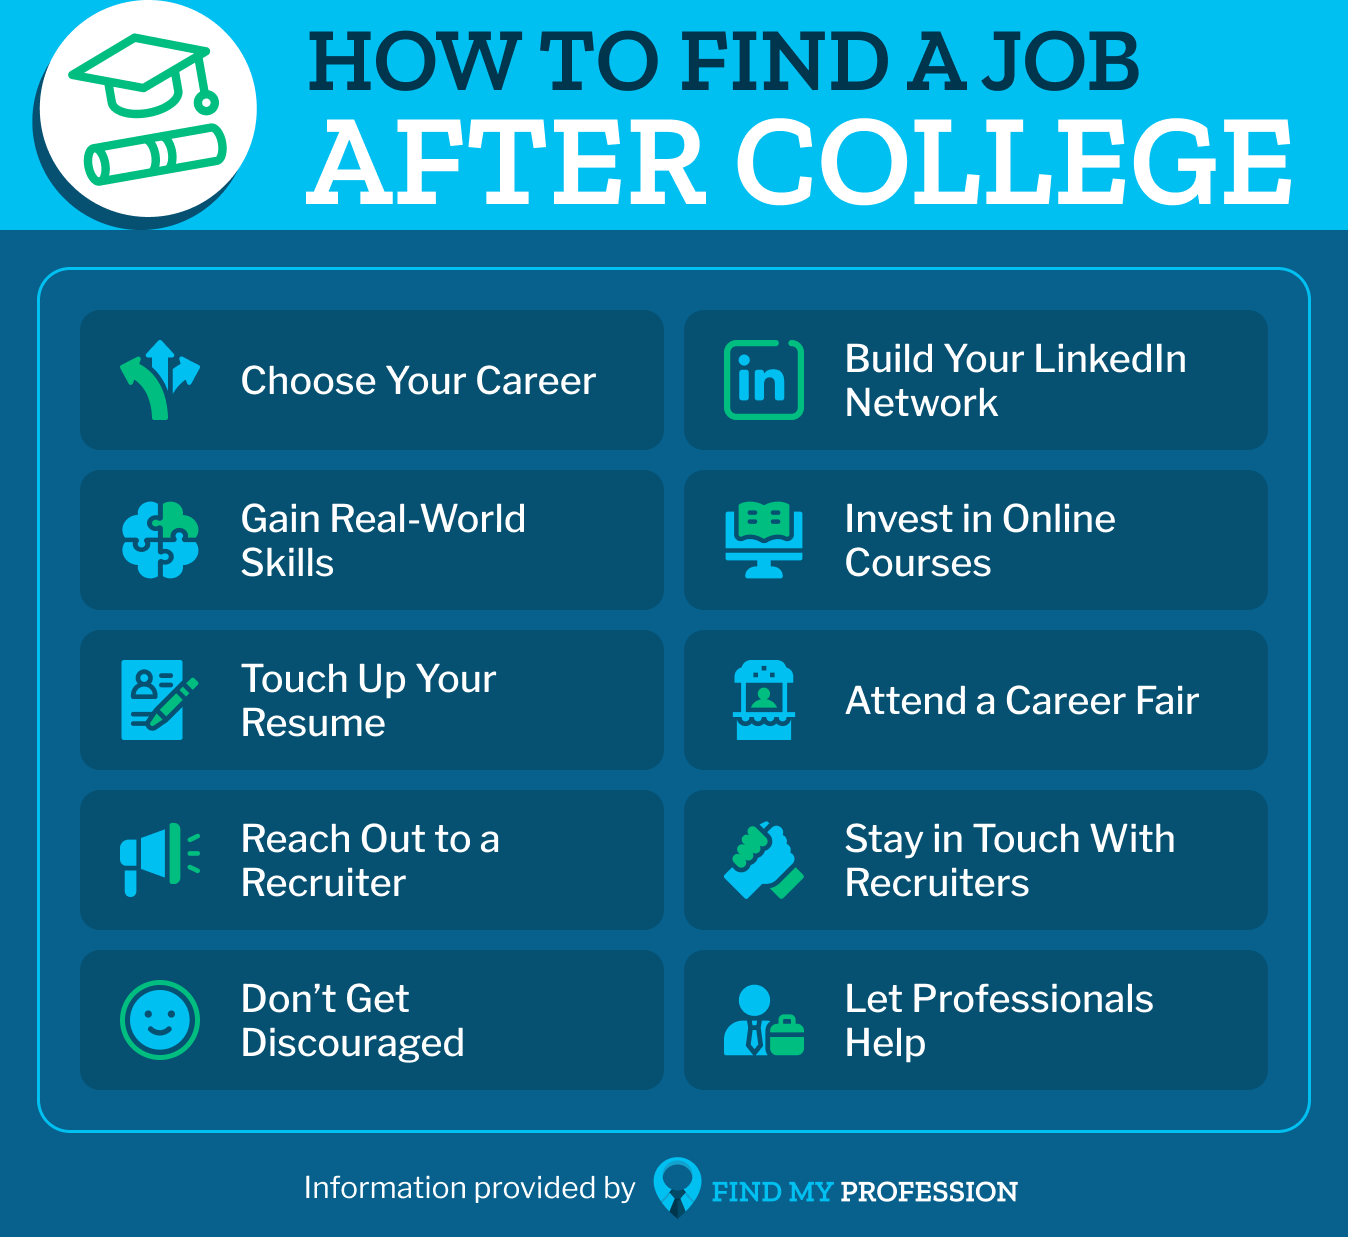 How to Find a Job After College